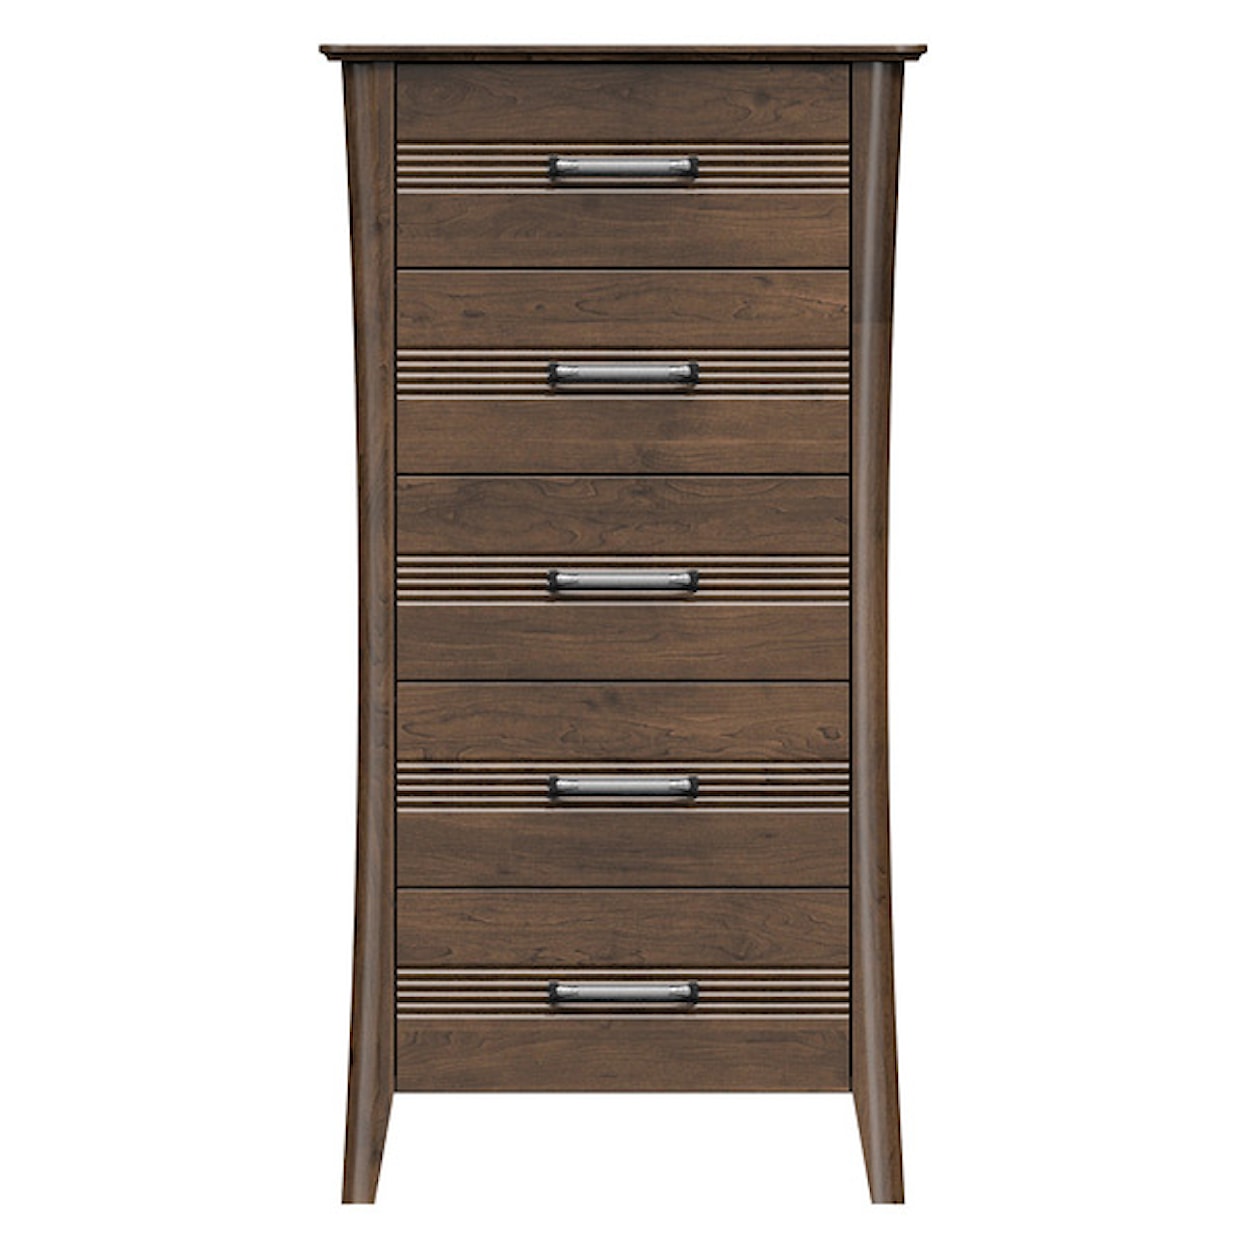 Country View Woodworking Westwood Bedroom Chest of Drawers